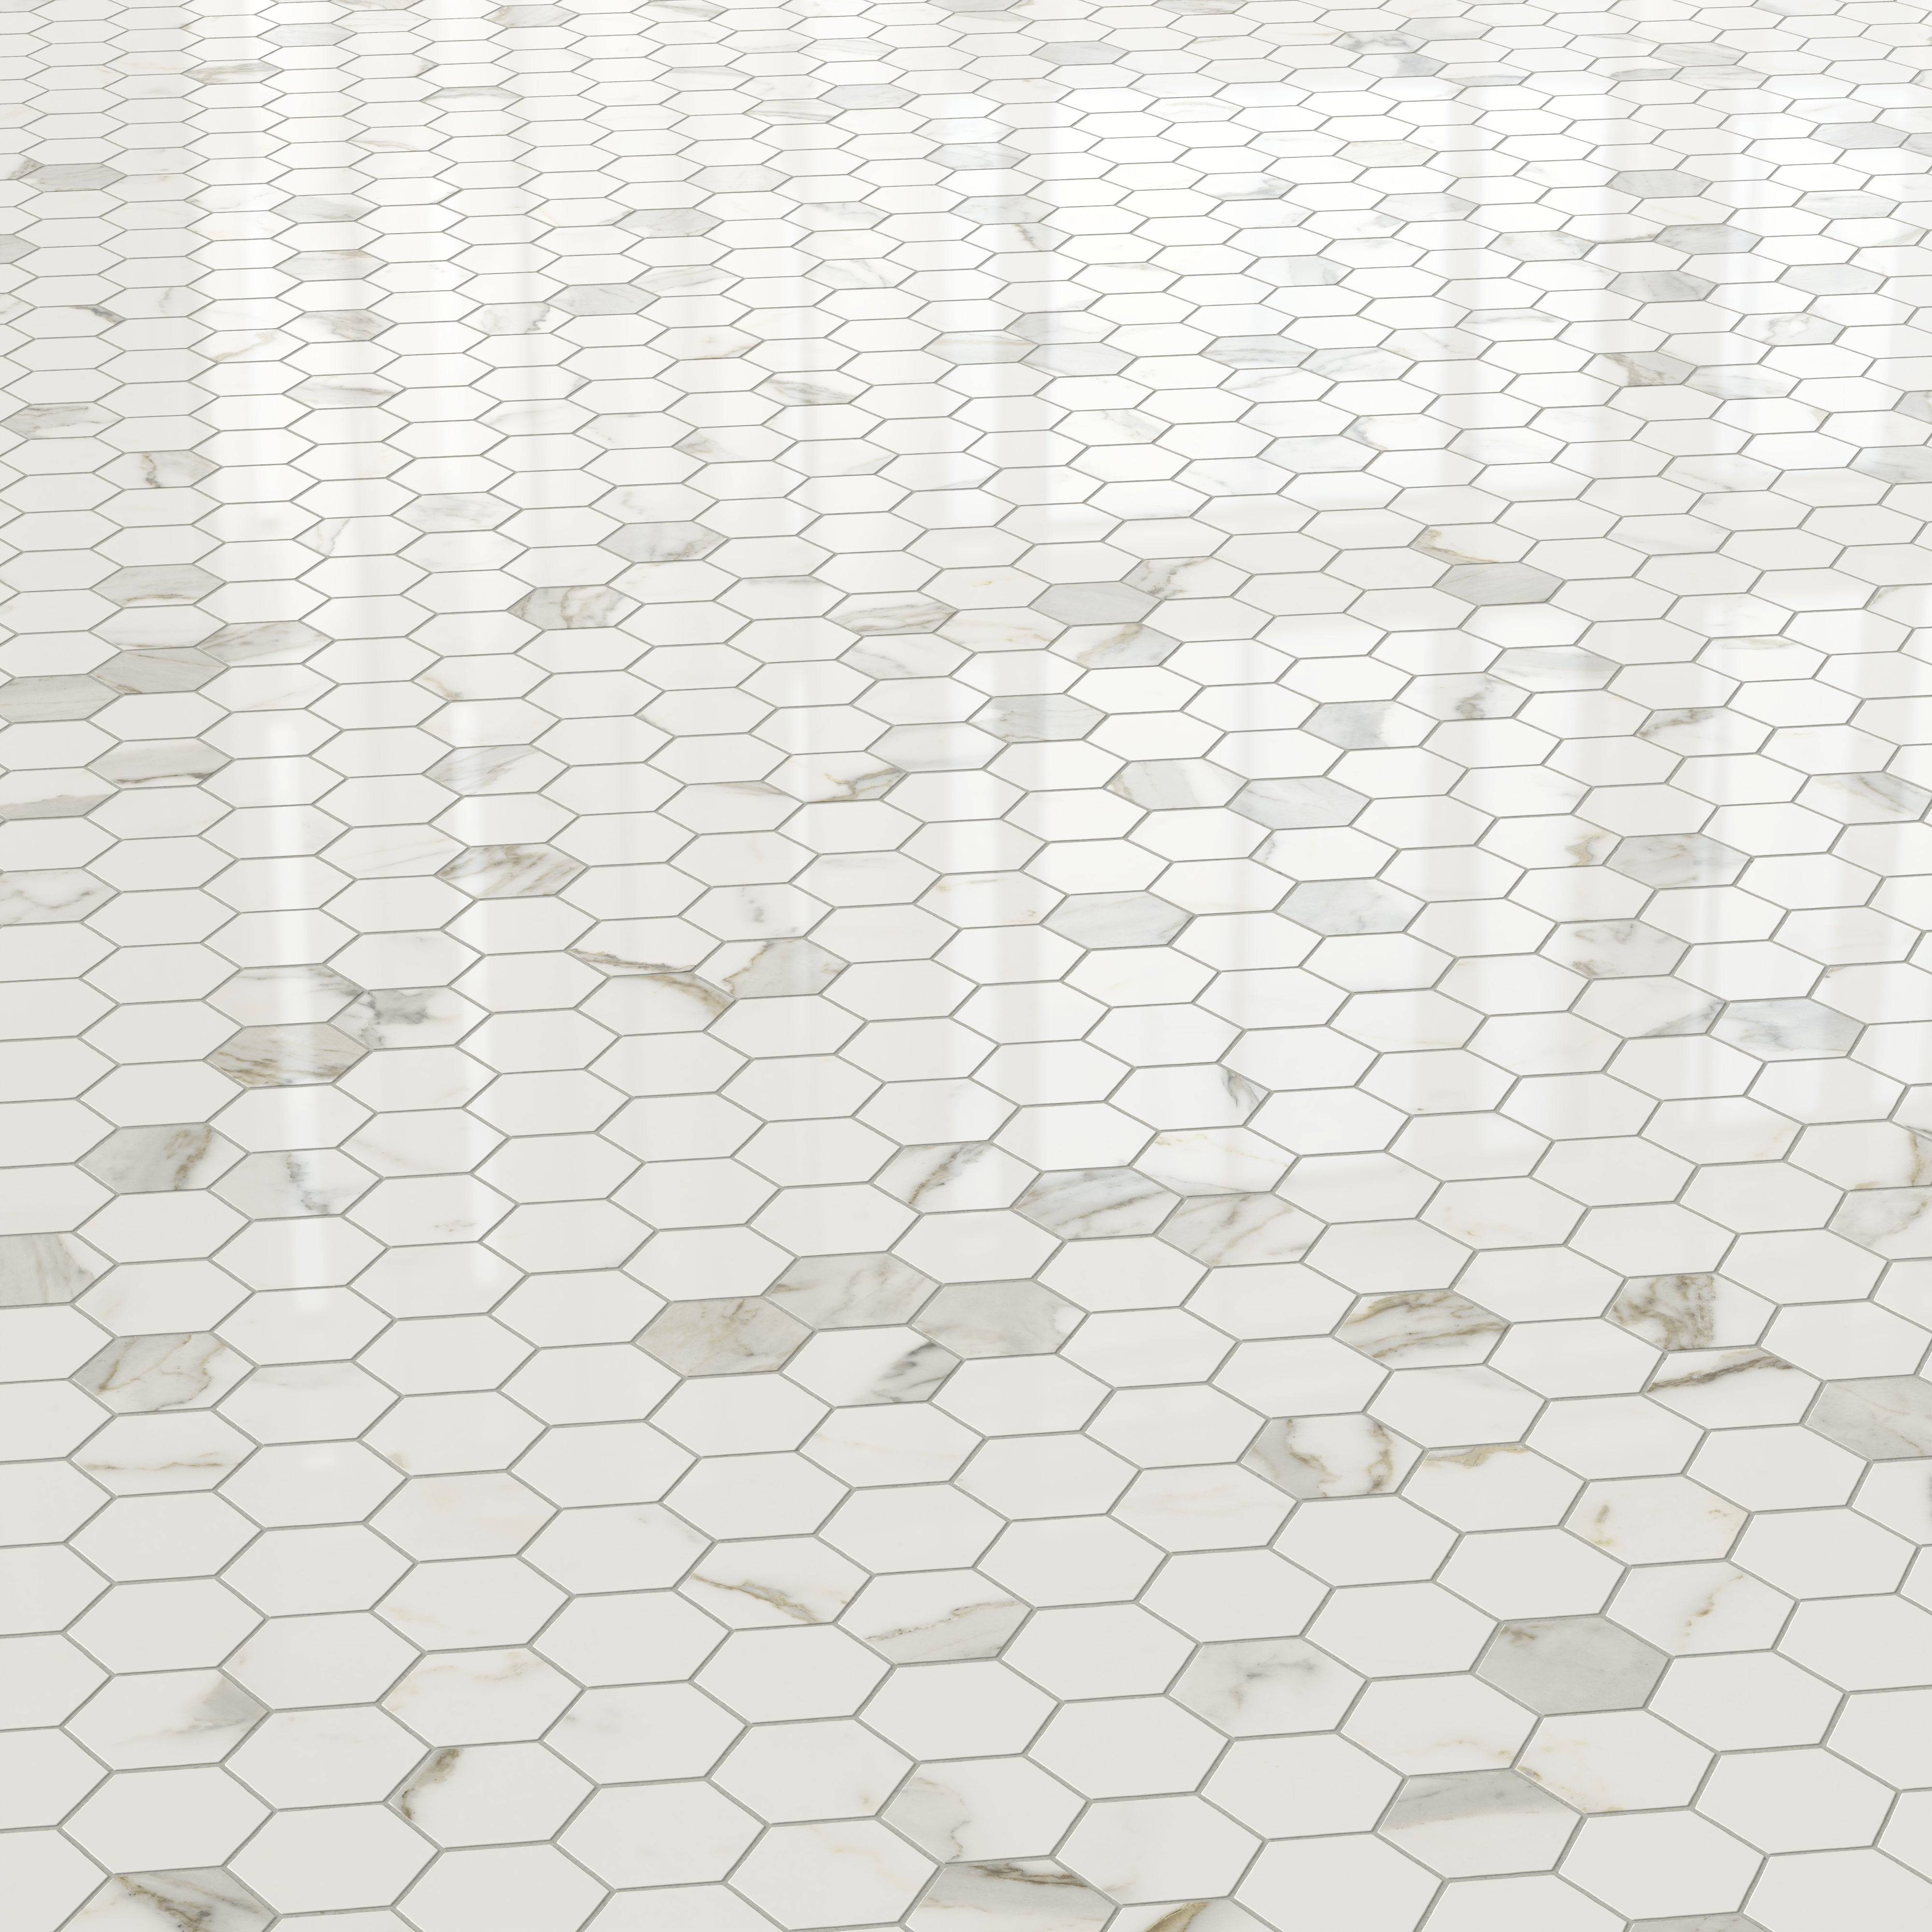 Aniston 2x2 Polished Porcelain Hexagon Mosaic Tile in Calacatta Top